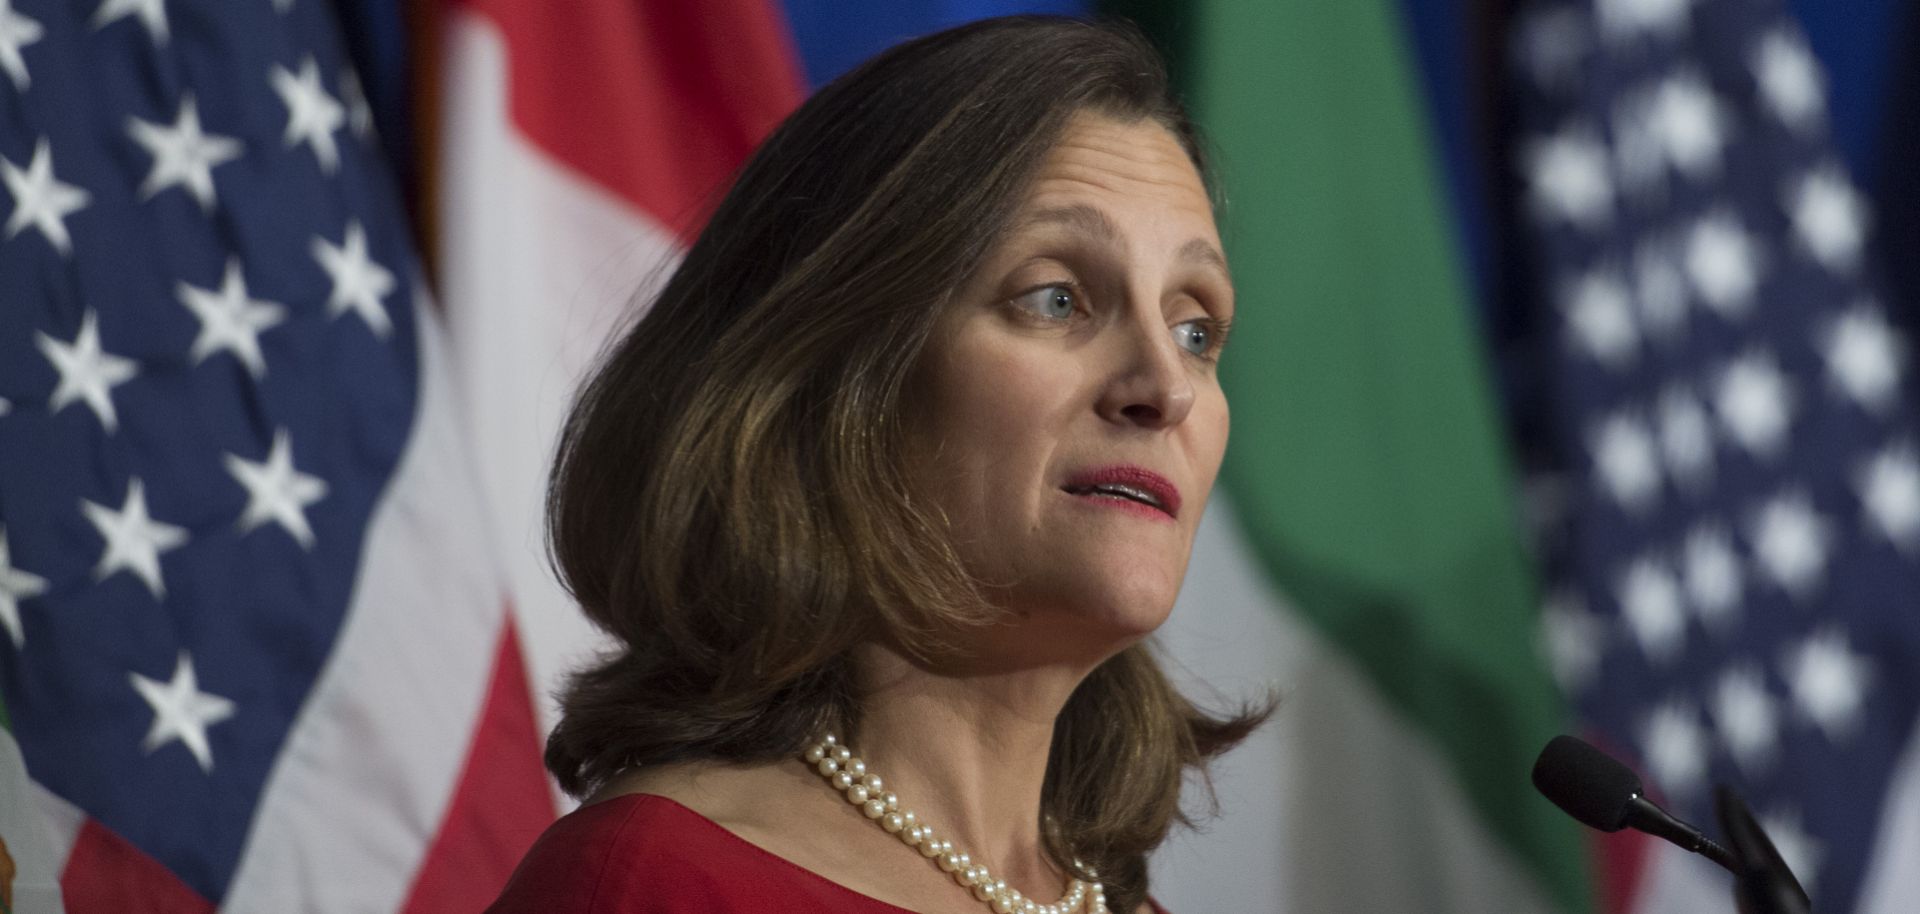 Canadian Foreign Minister Chrystia Freeland speaks during a press conference at the conclusion of the fourth round of negotiations for a new North American Free Trade Agreement (NAFTA) in 2017. Canada's trade case against U.S. trade remedy measures in the World Trade Organization will be at the forefront of global pushback against Washington's protectionist trade agenda.